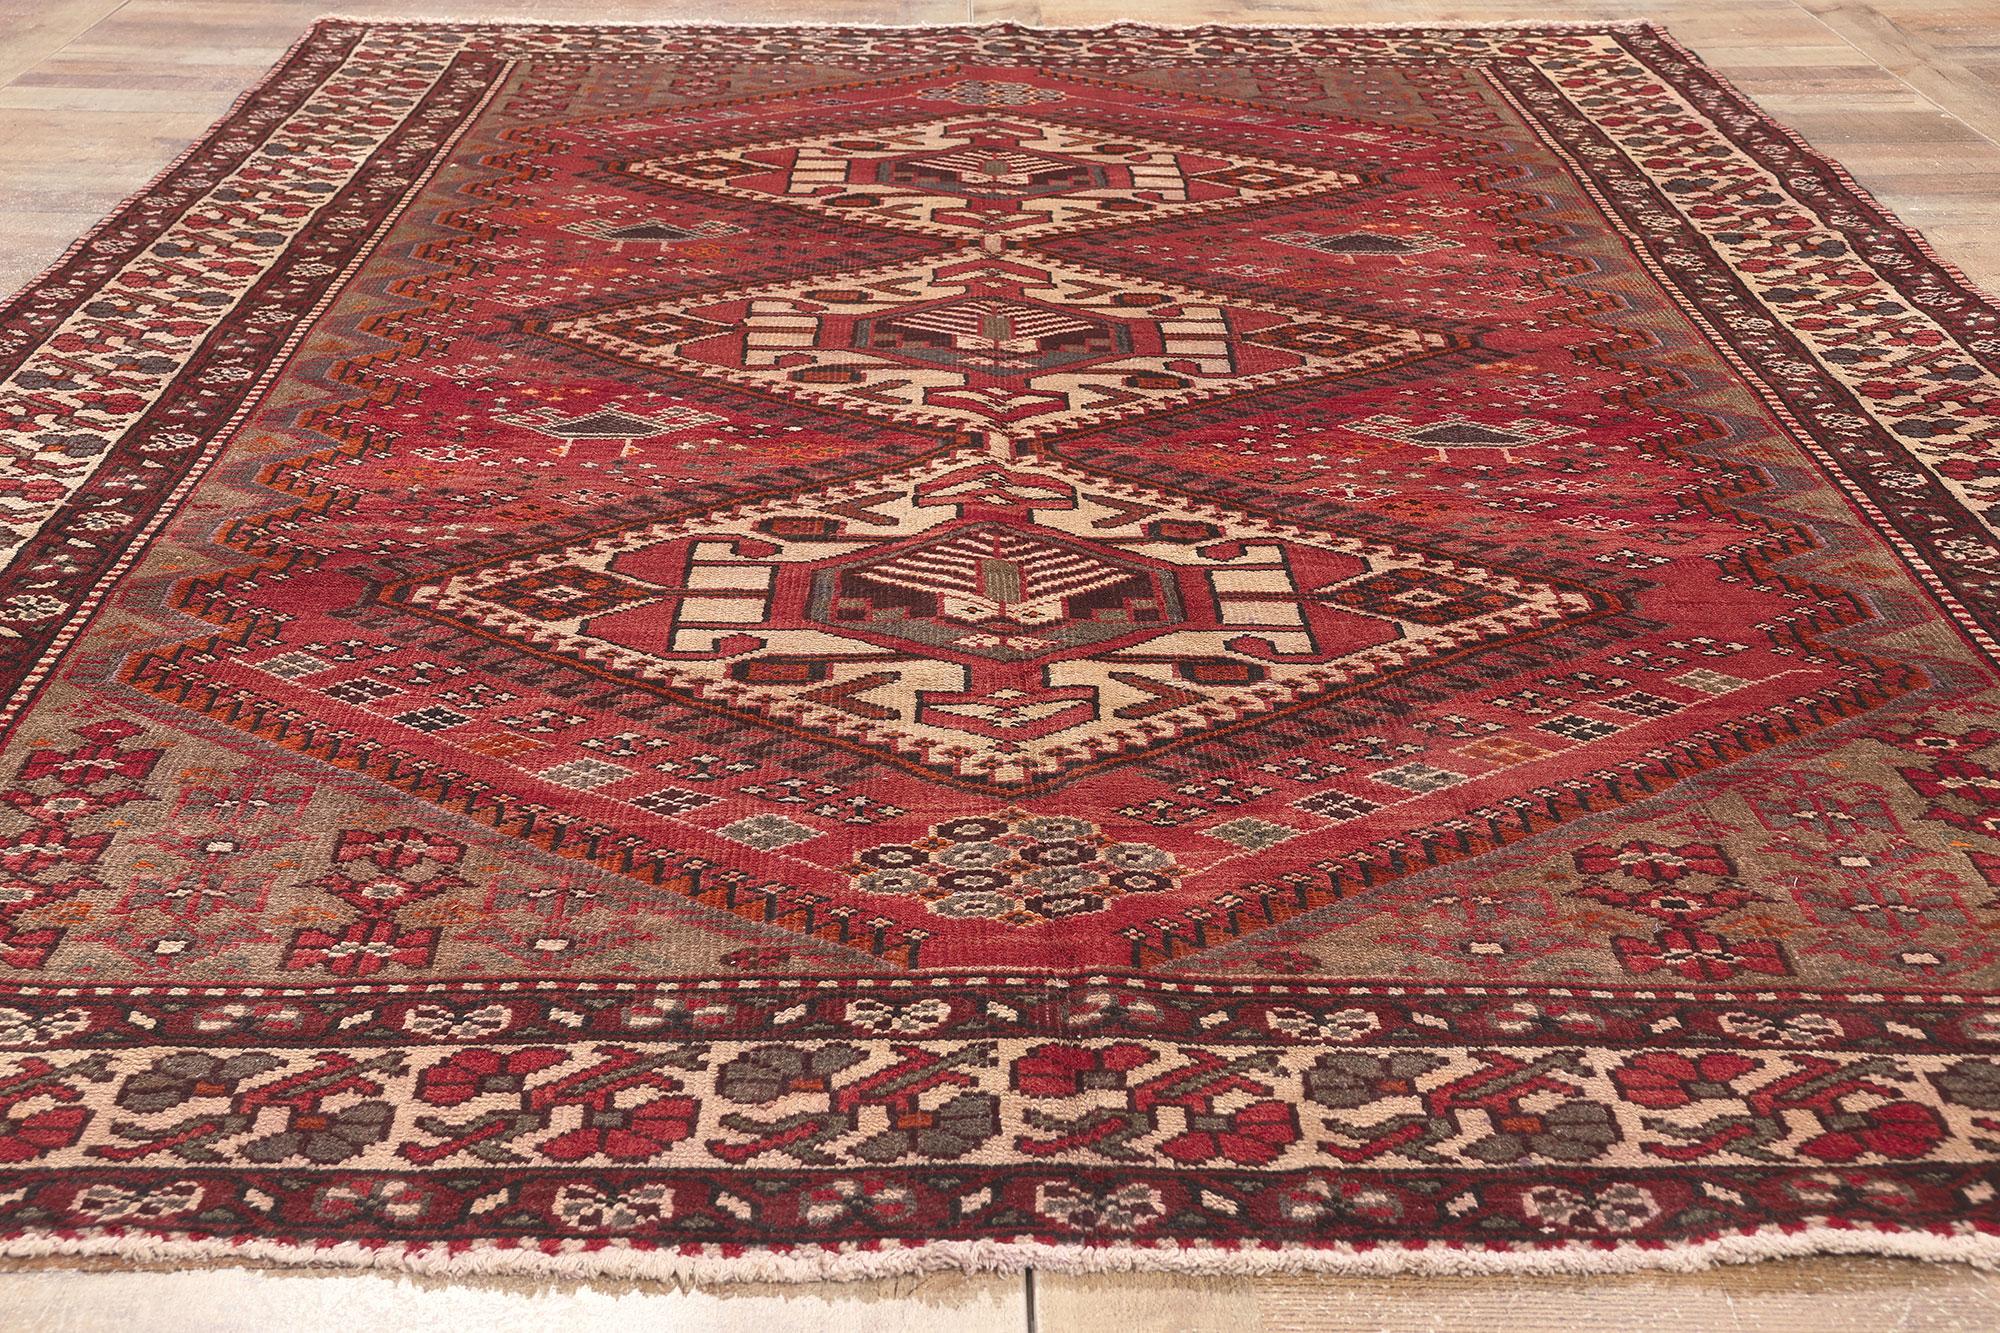 Vintage Persian Hamadan Rug, Nomadic Charm Meets Decidedly Dramatic For Sale 1